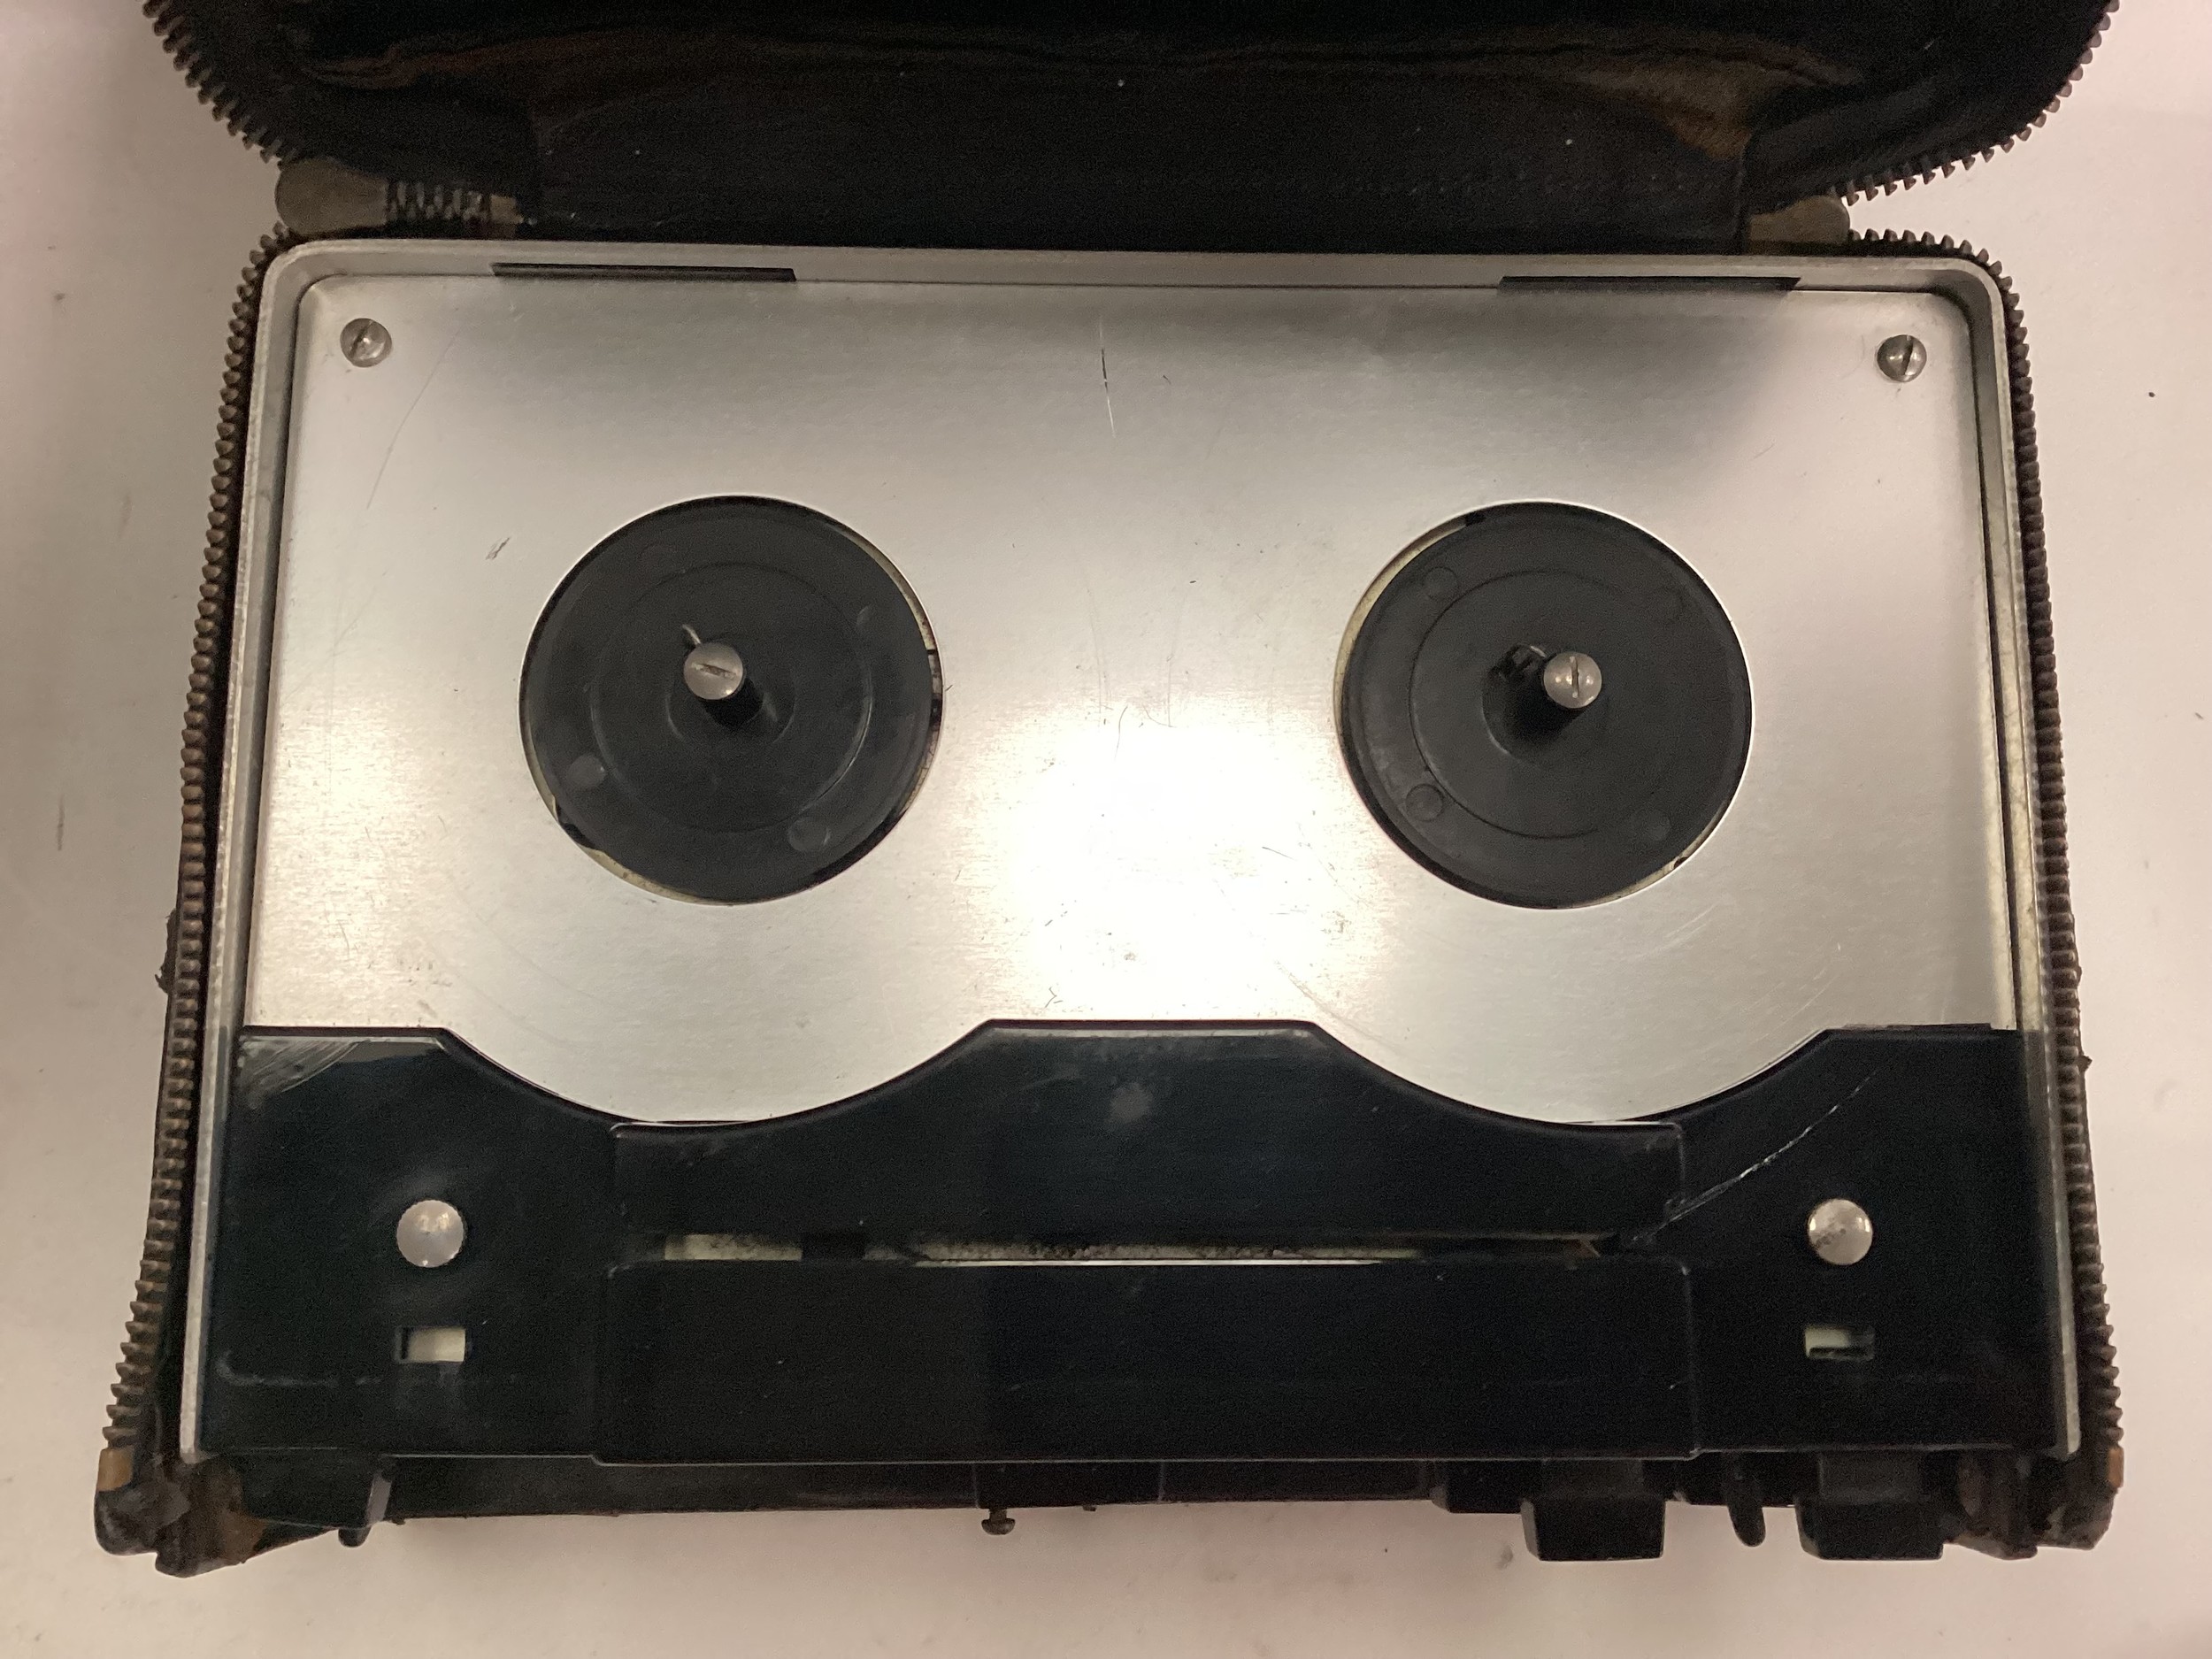 FI-CORD PORTABLE REEL TO REEL TAPE RECORDERS. Here we have 2 tape recorders model No. 202A. One - Image 3 of 8